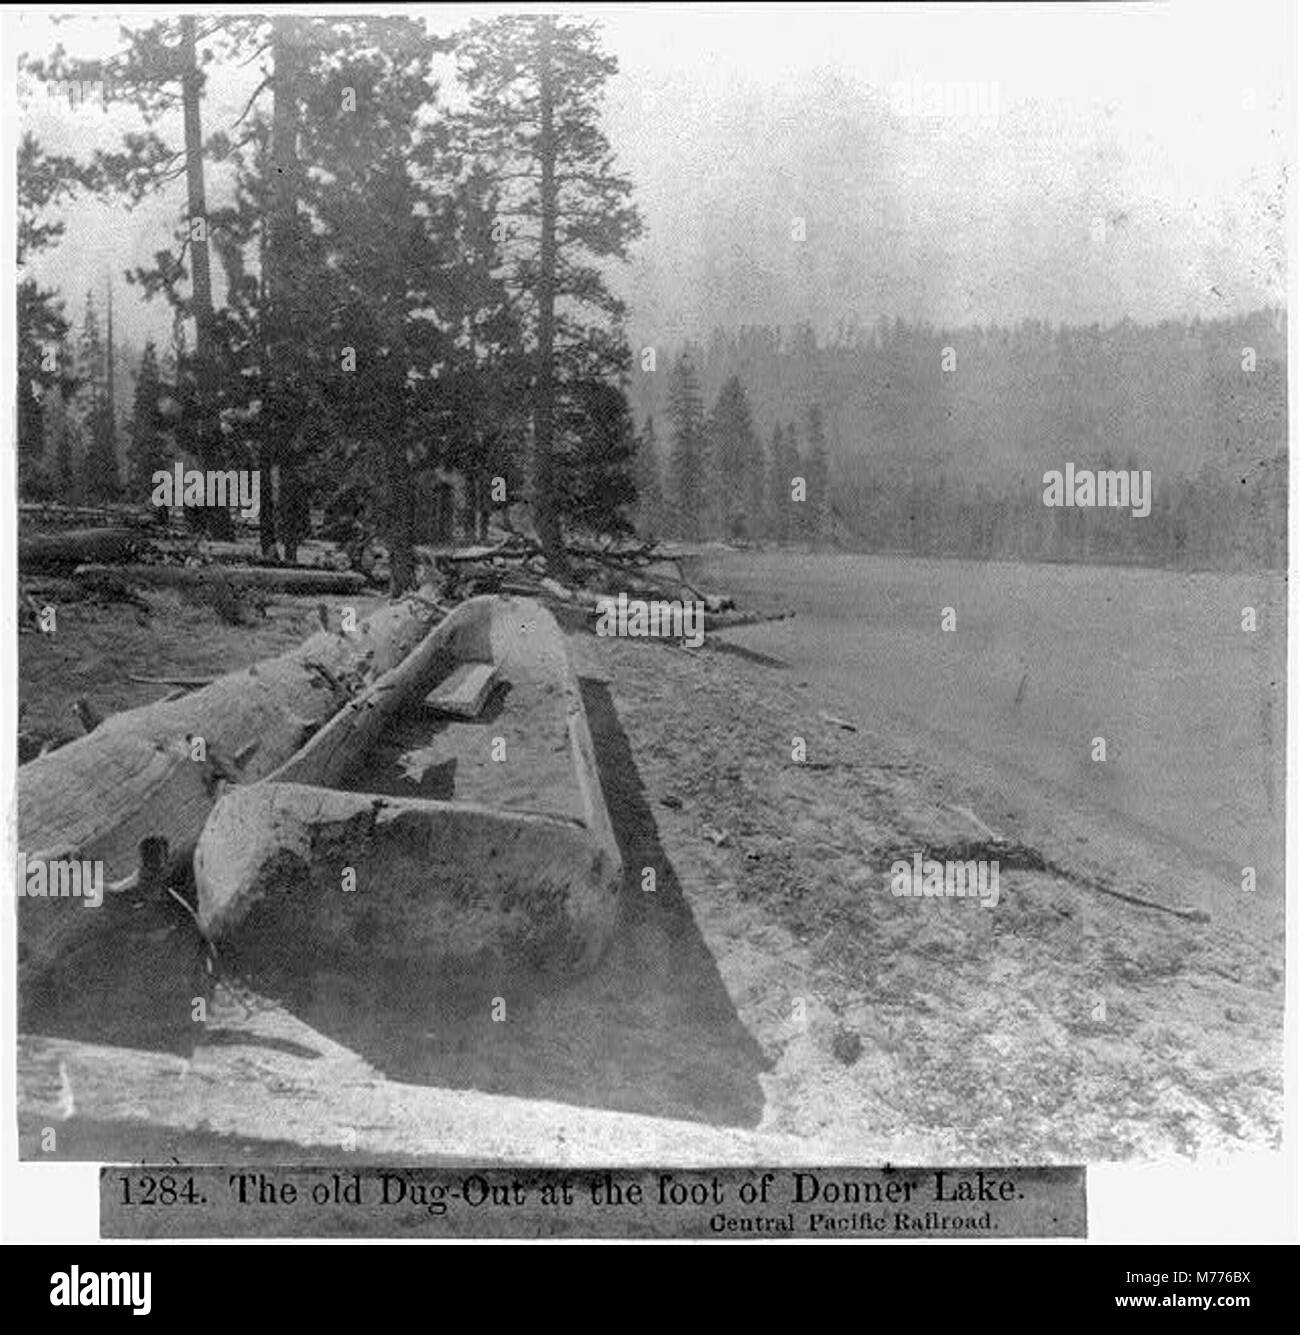 The old Dug-Out at the foot of Donner Lake - Central Pacific Railroad ...